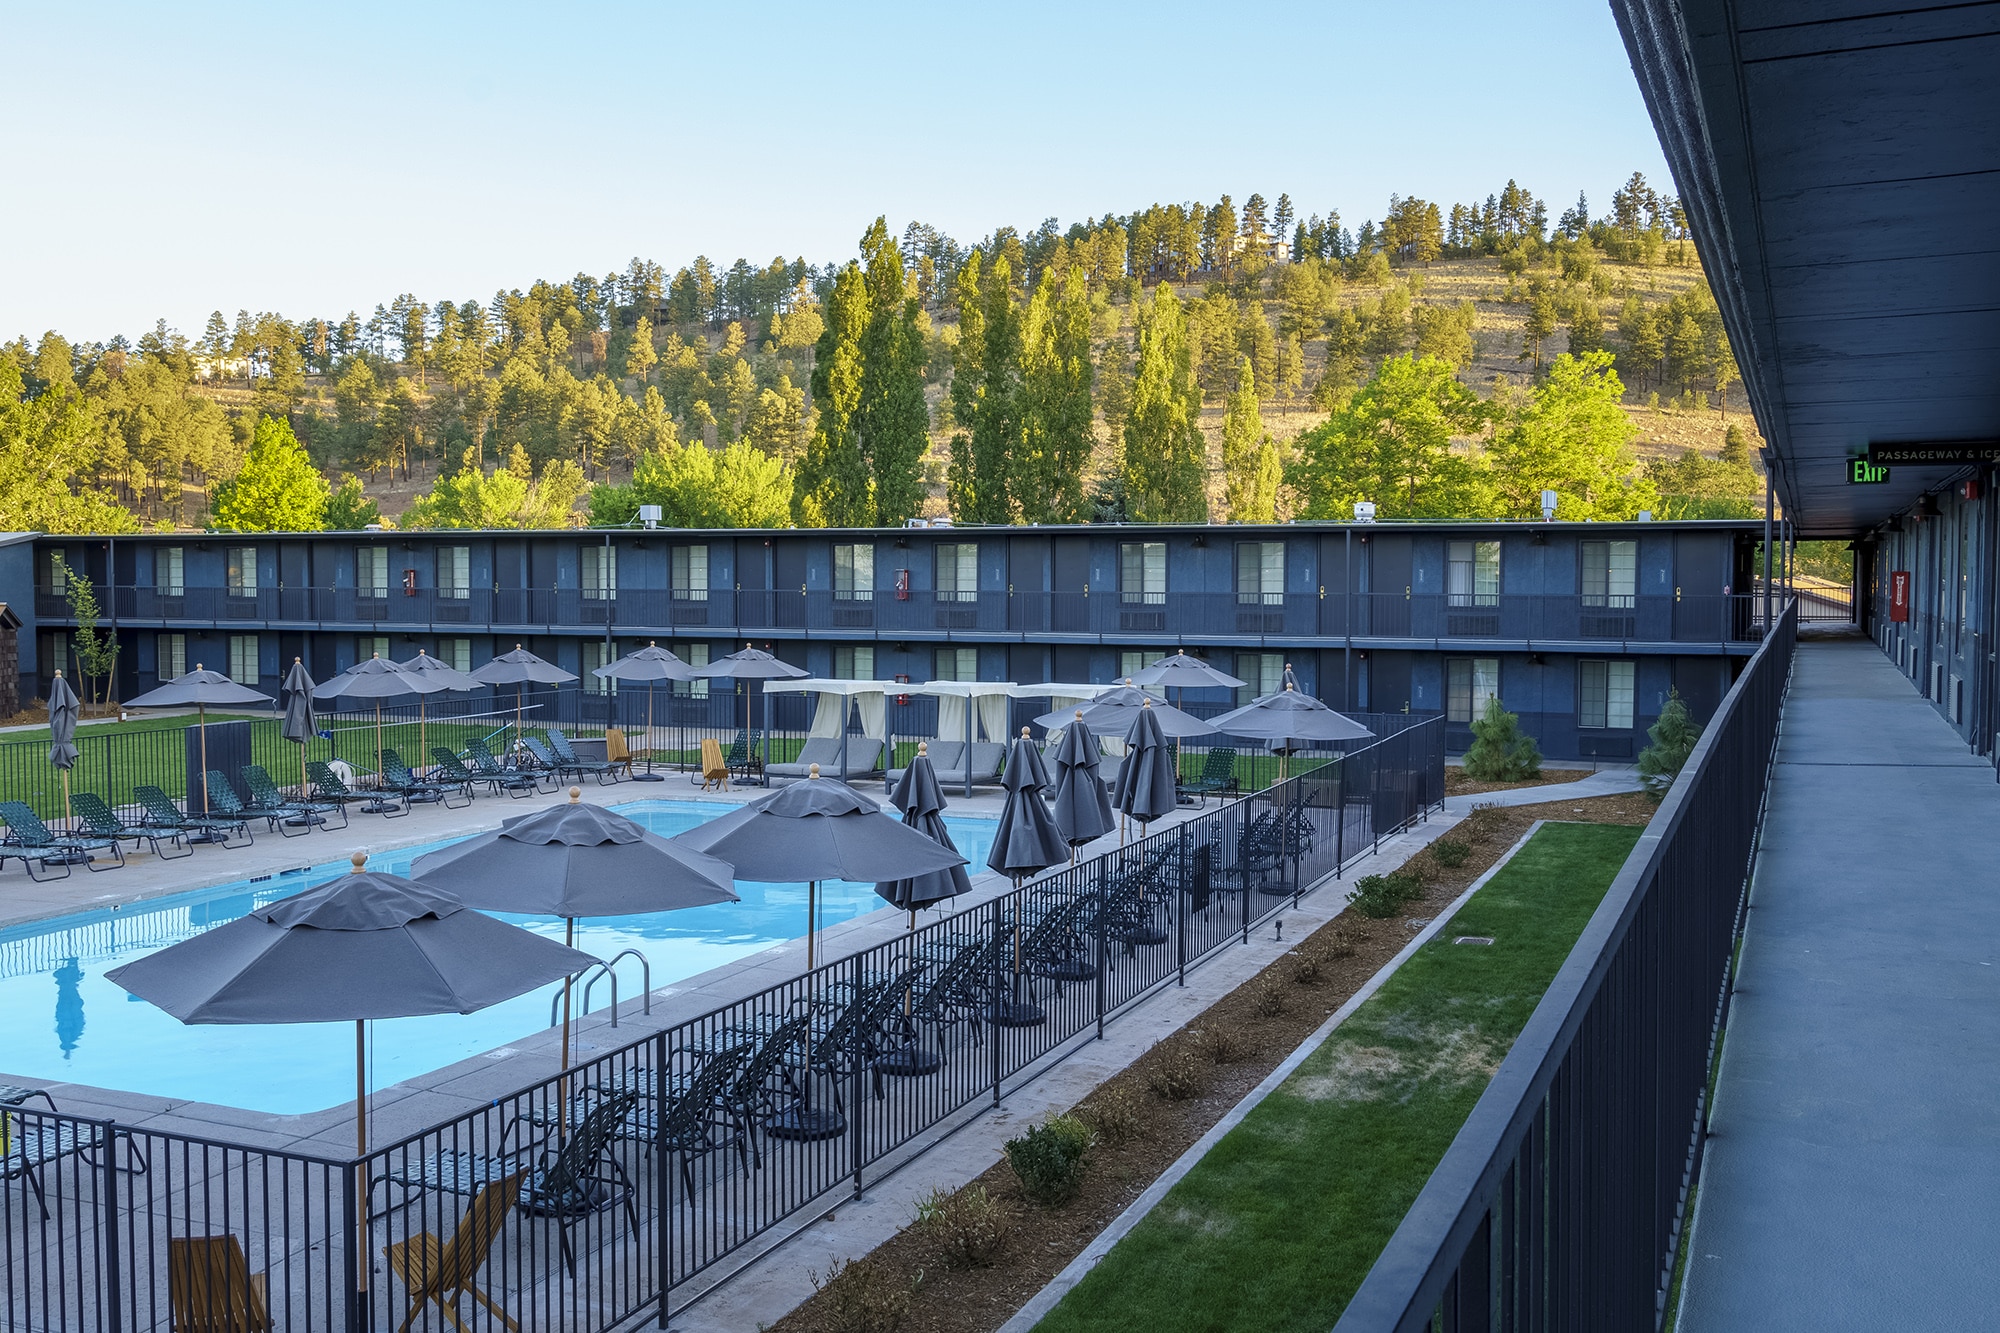 High Country Motor Lodge | SDCO Partners